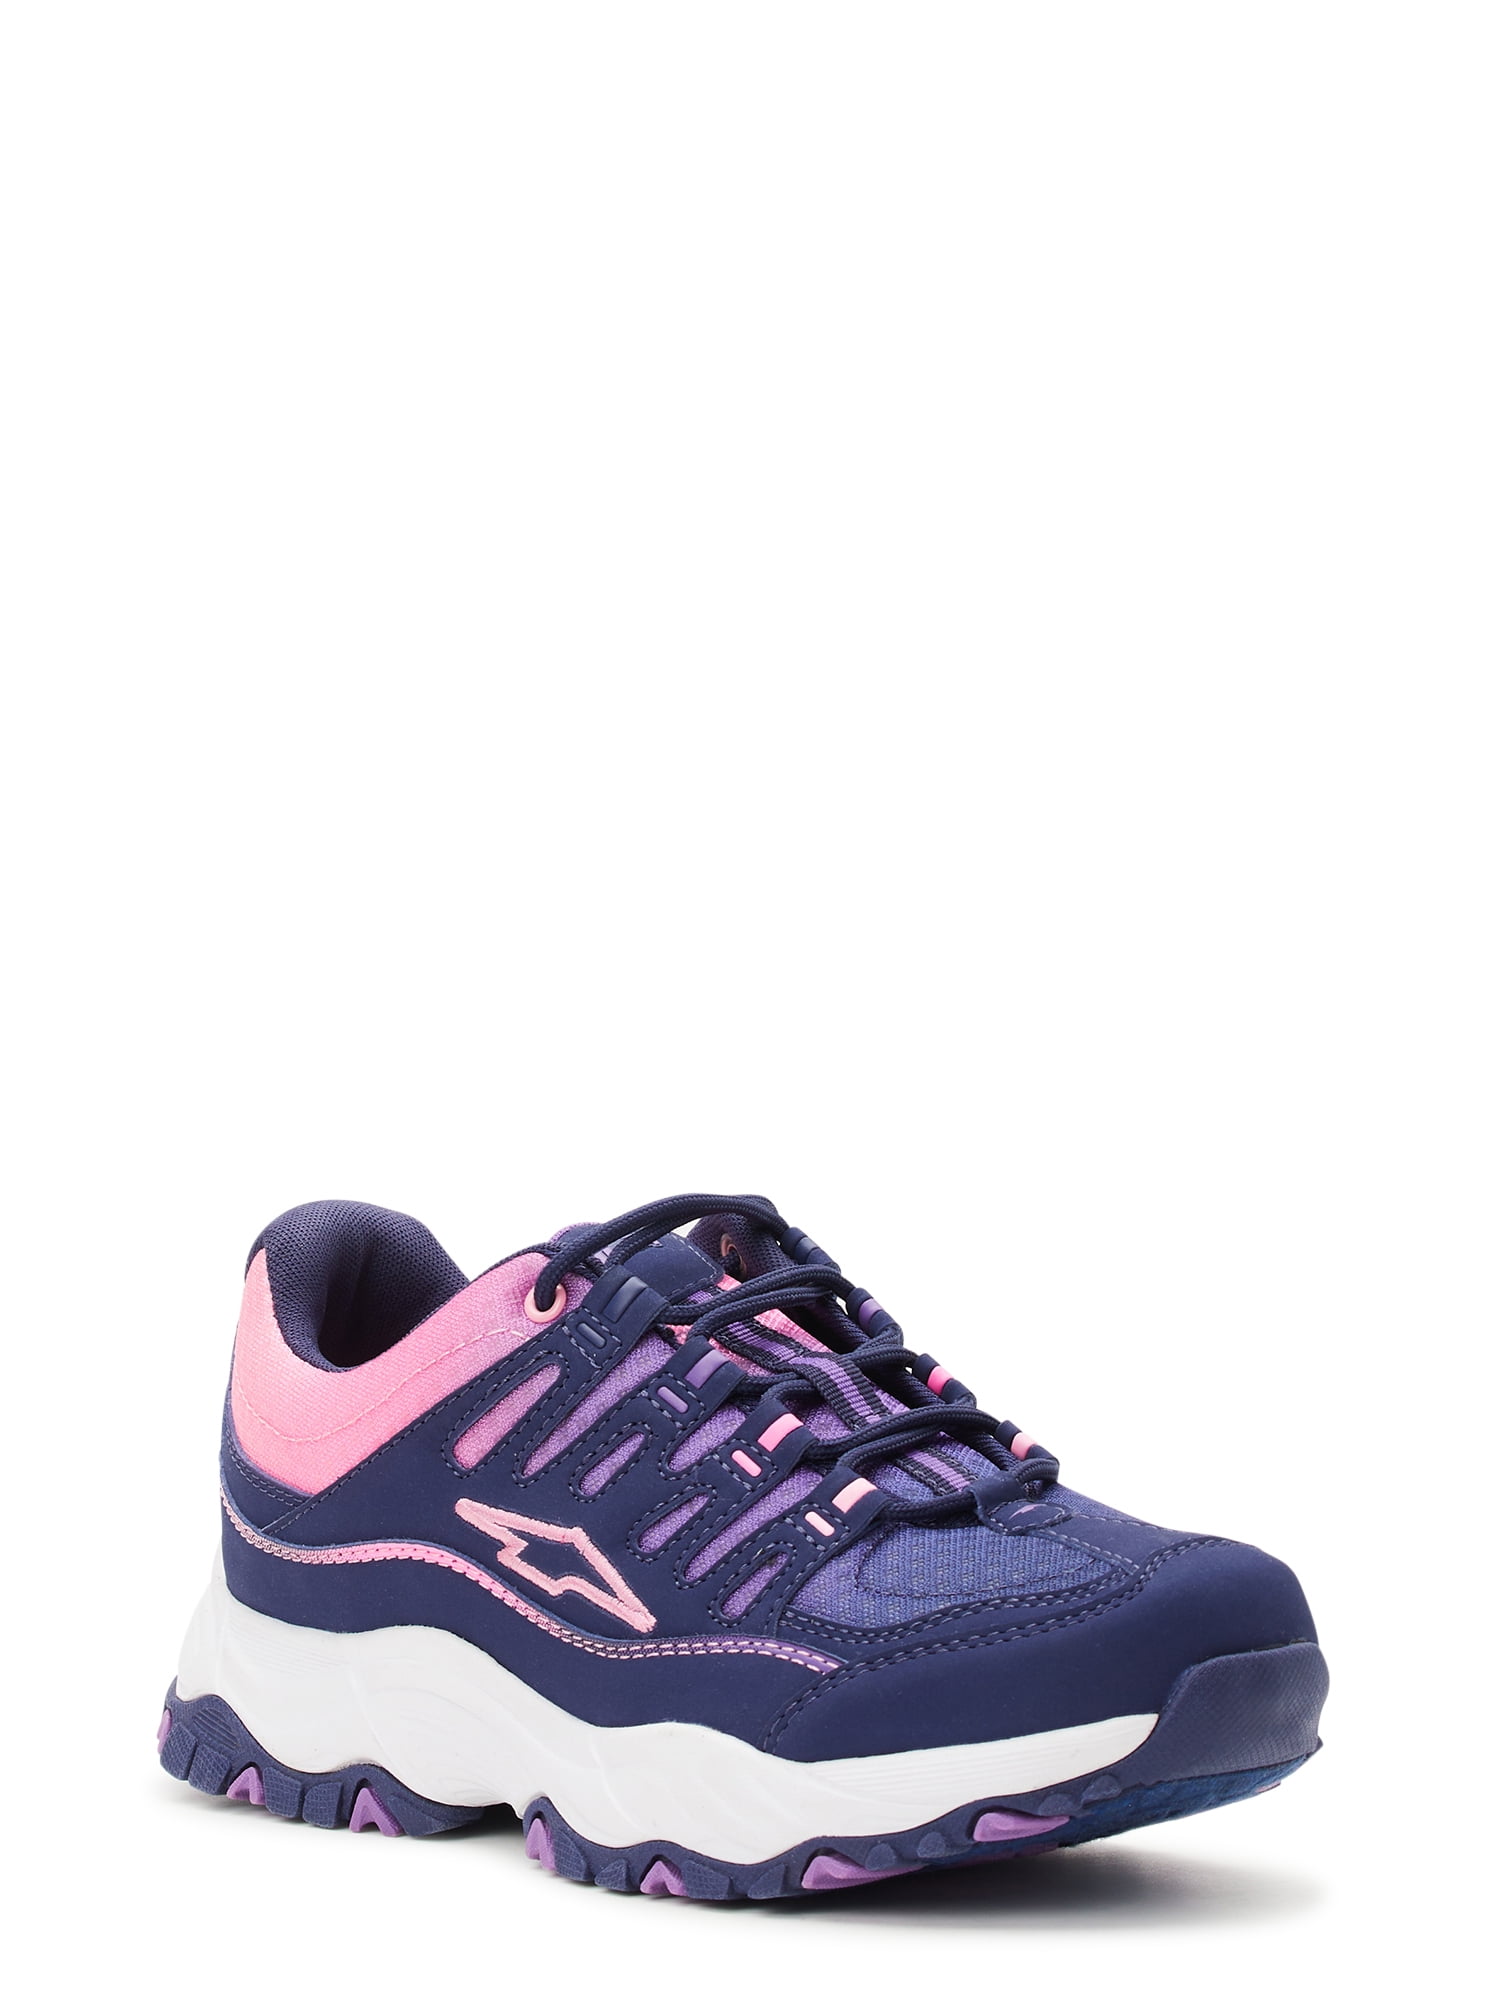 Avia Women's Elevate Athletic Sneakers, Wide Width Available - Walmart.com